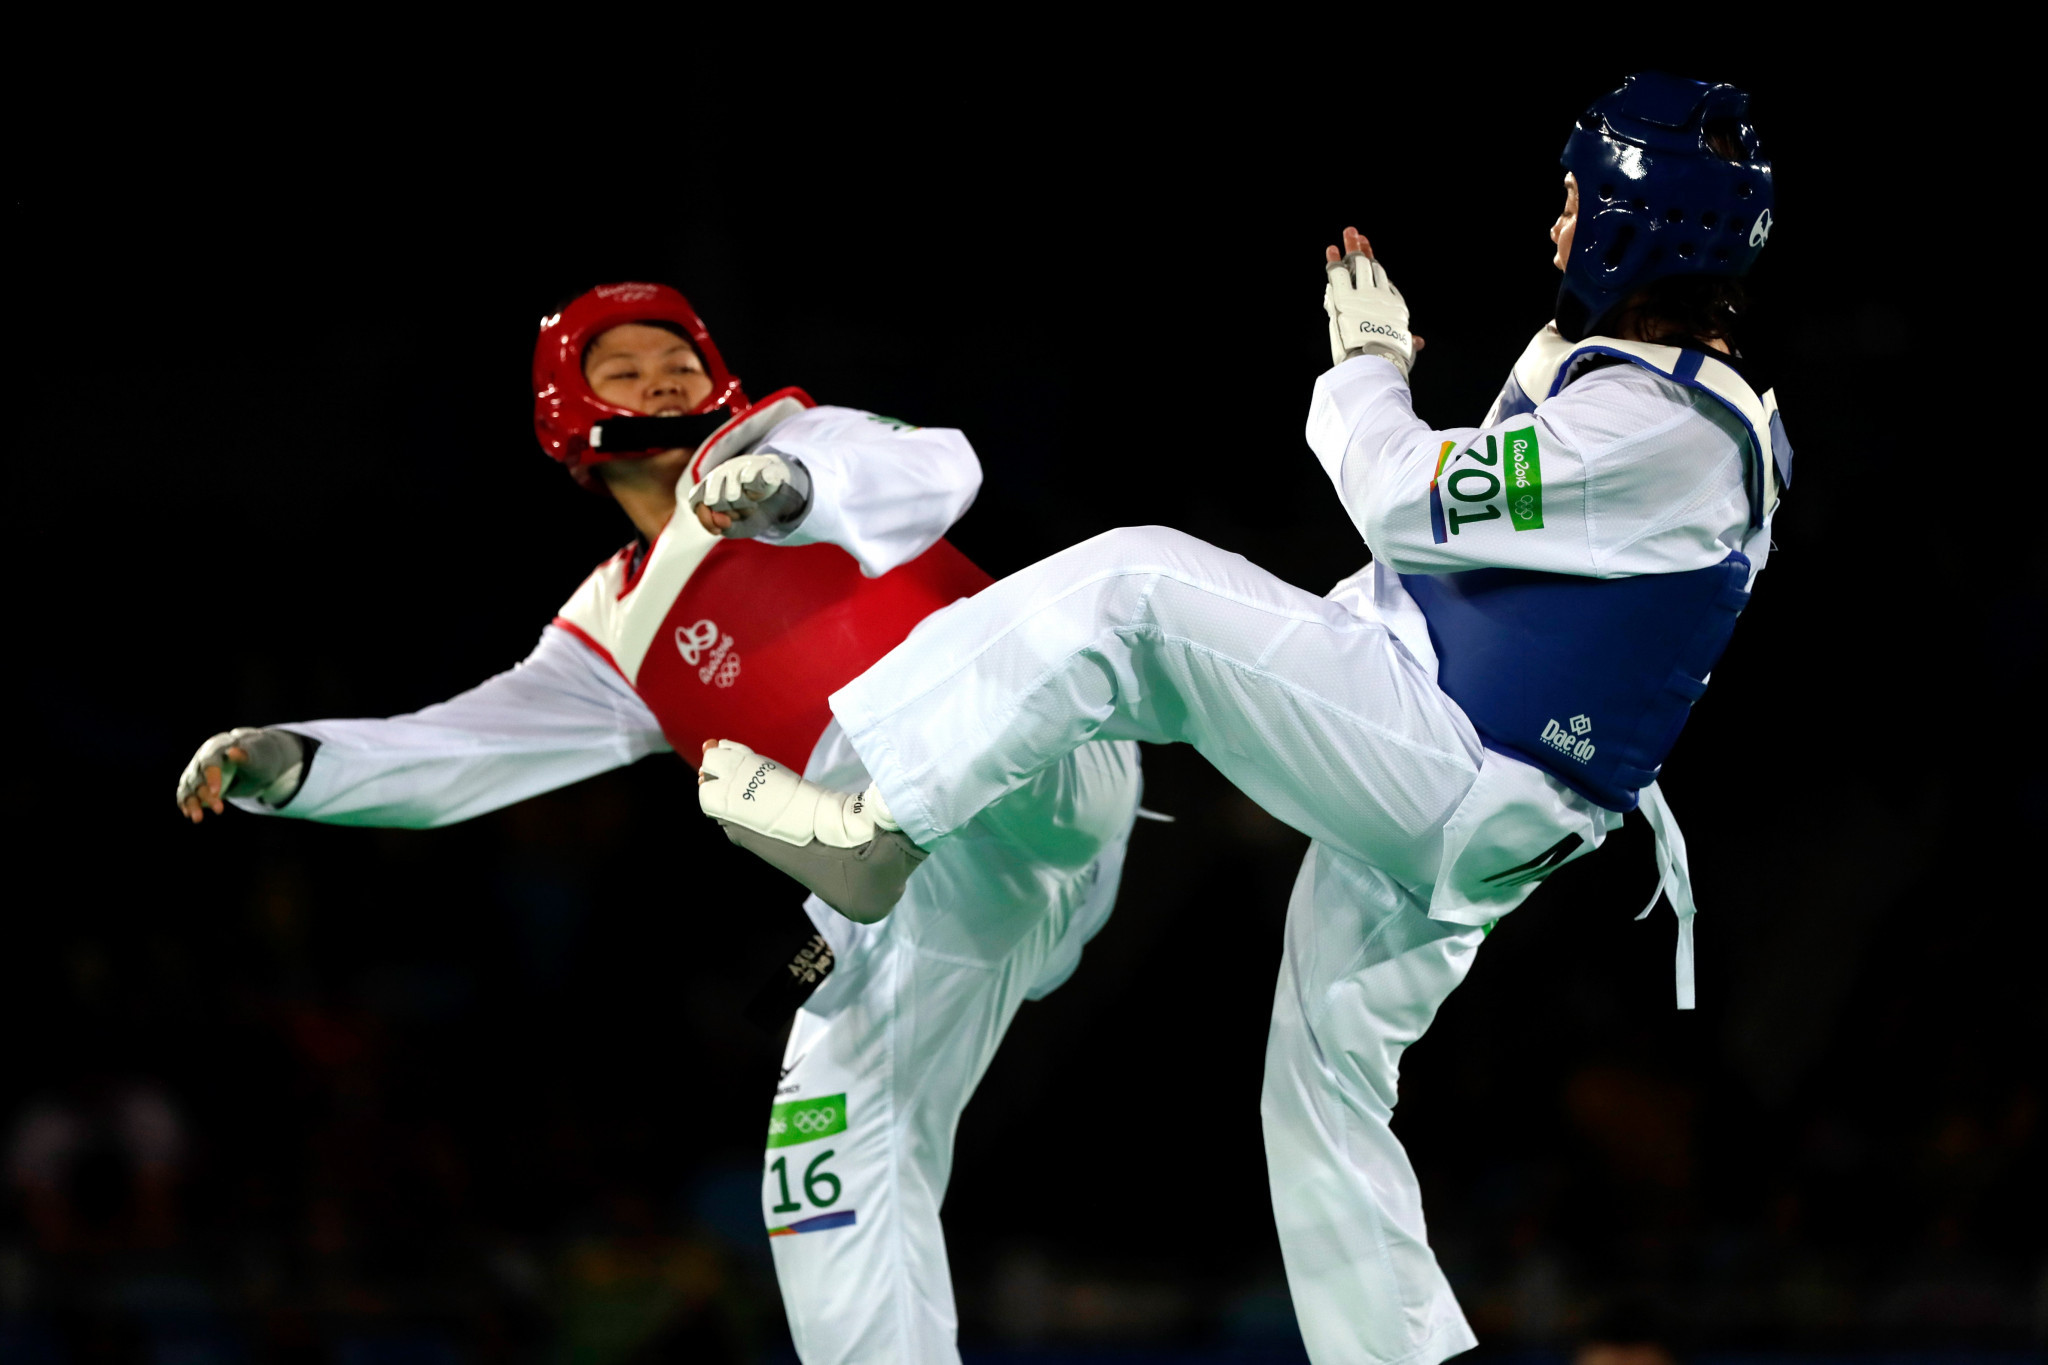 Alora lost to María Espinoza of Mexico in the opening round at Rio 2016 ©Getty Images